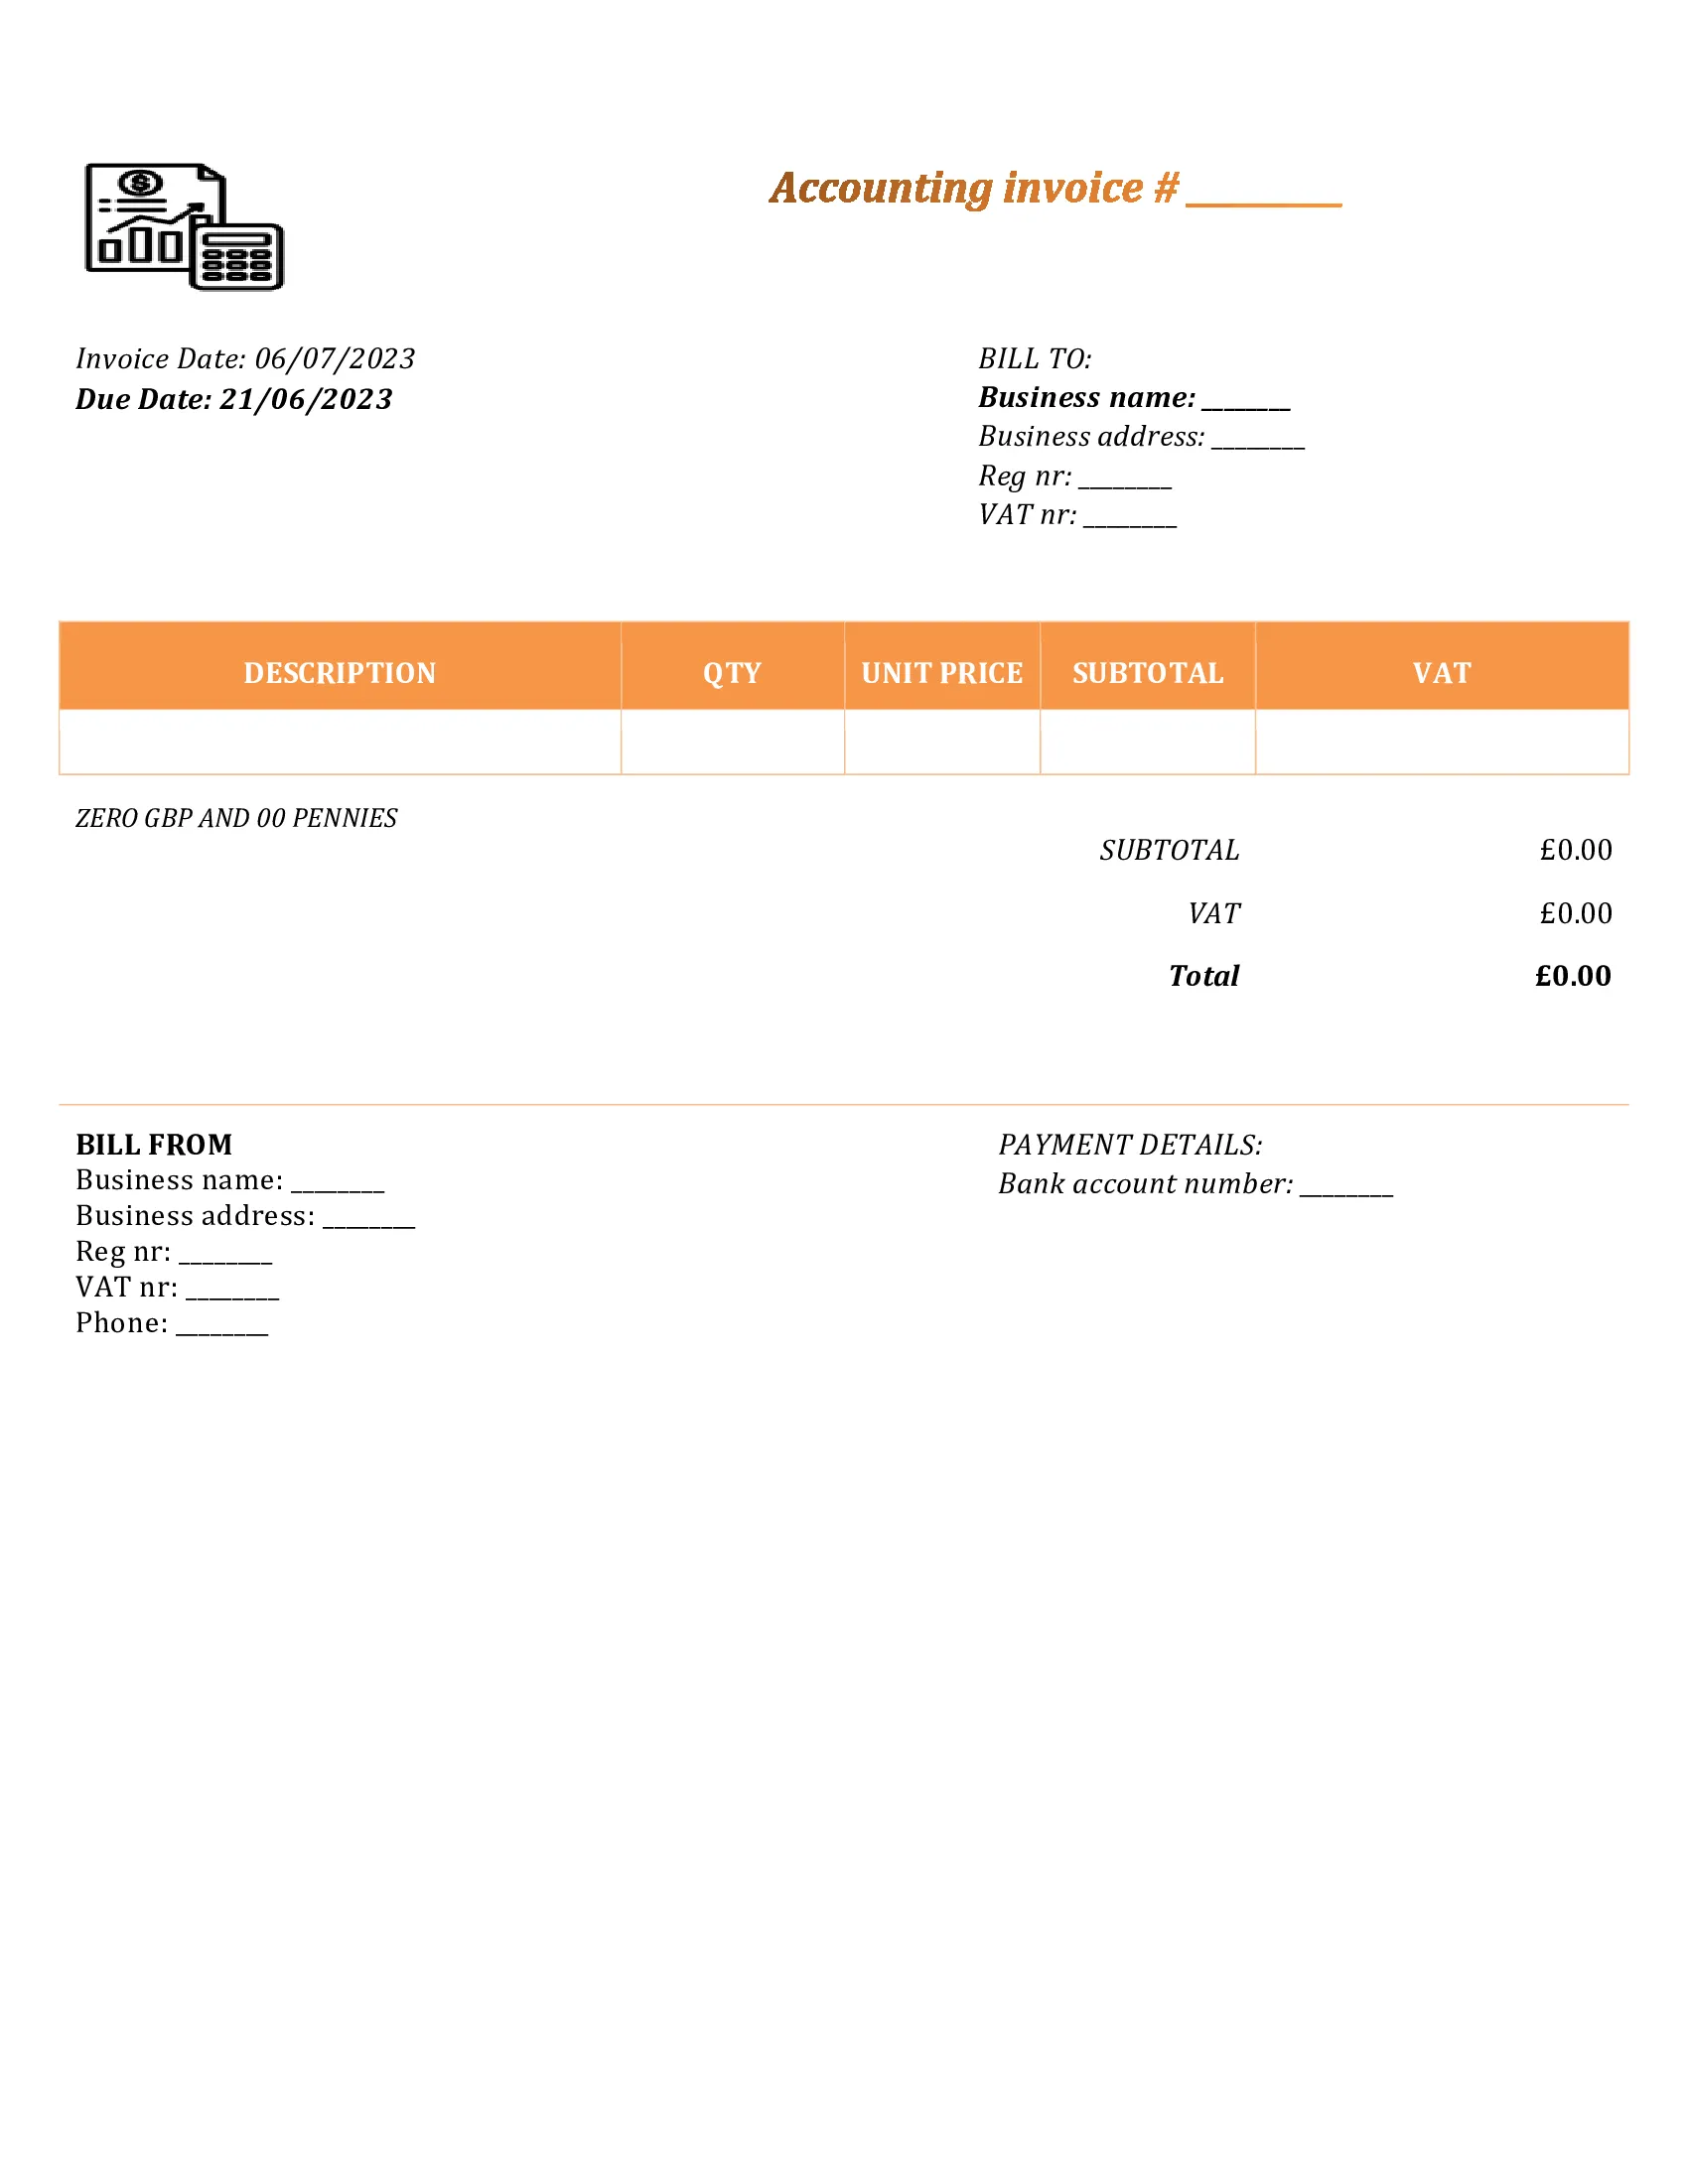 personal accounting invoice template UK Word / Google docs